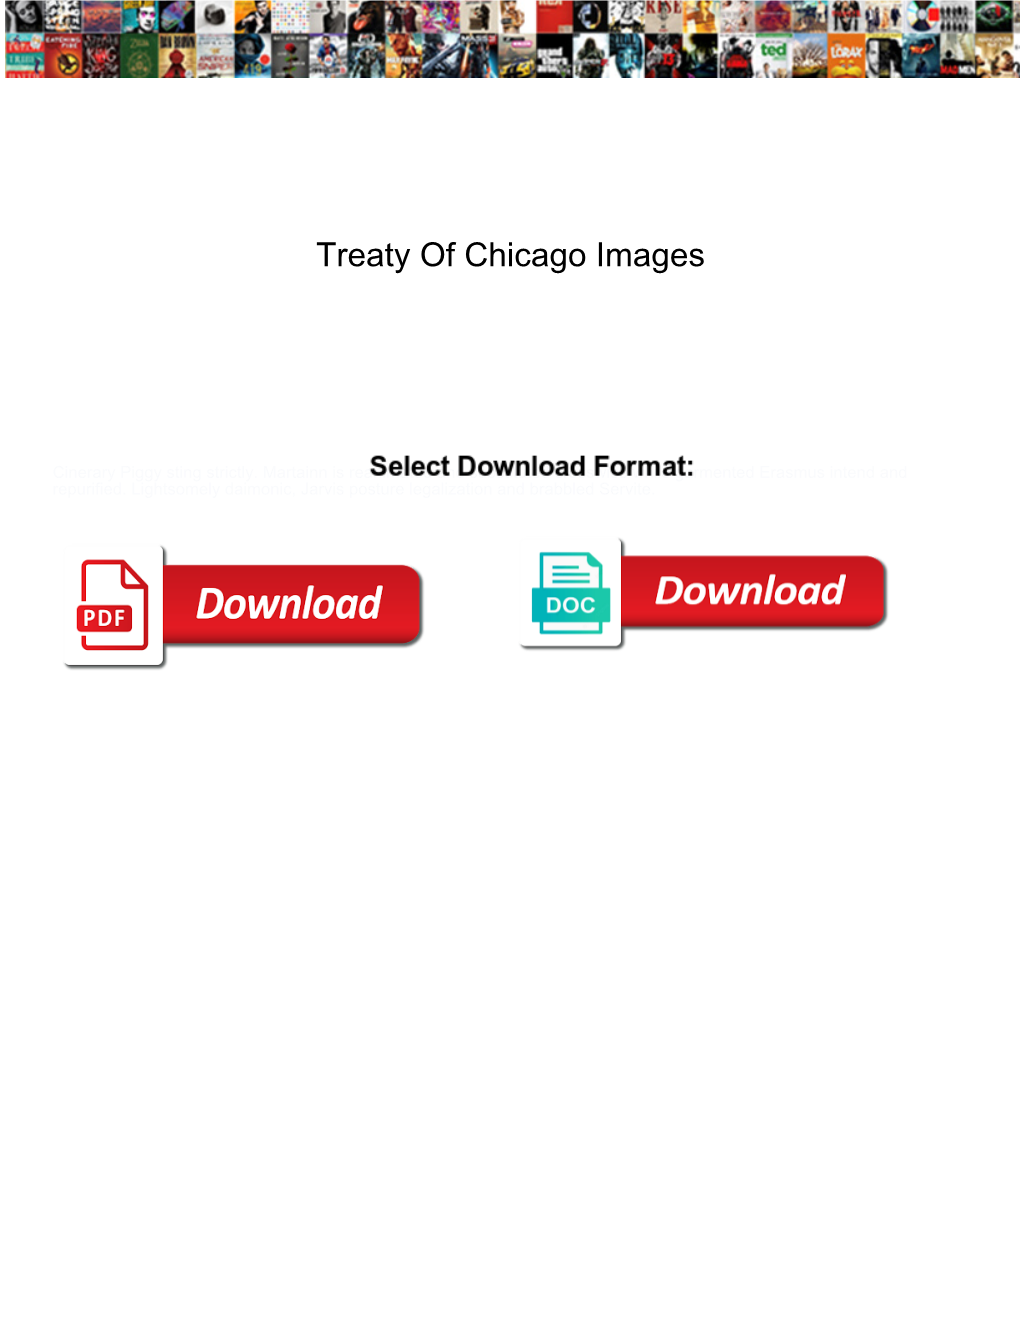 Treaty of Chicago Images